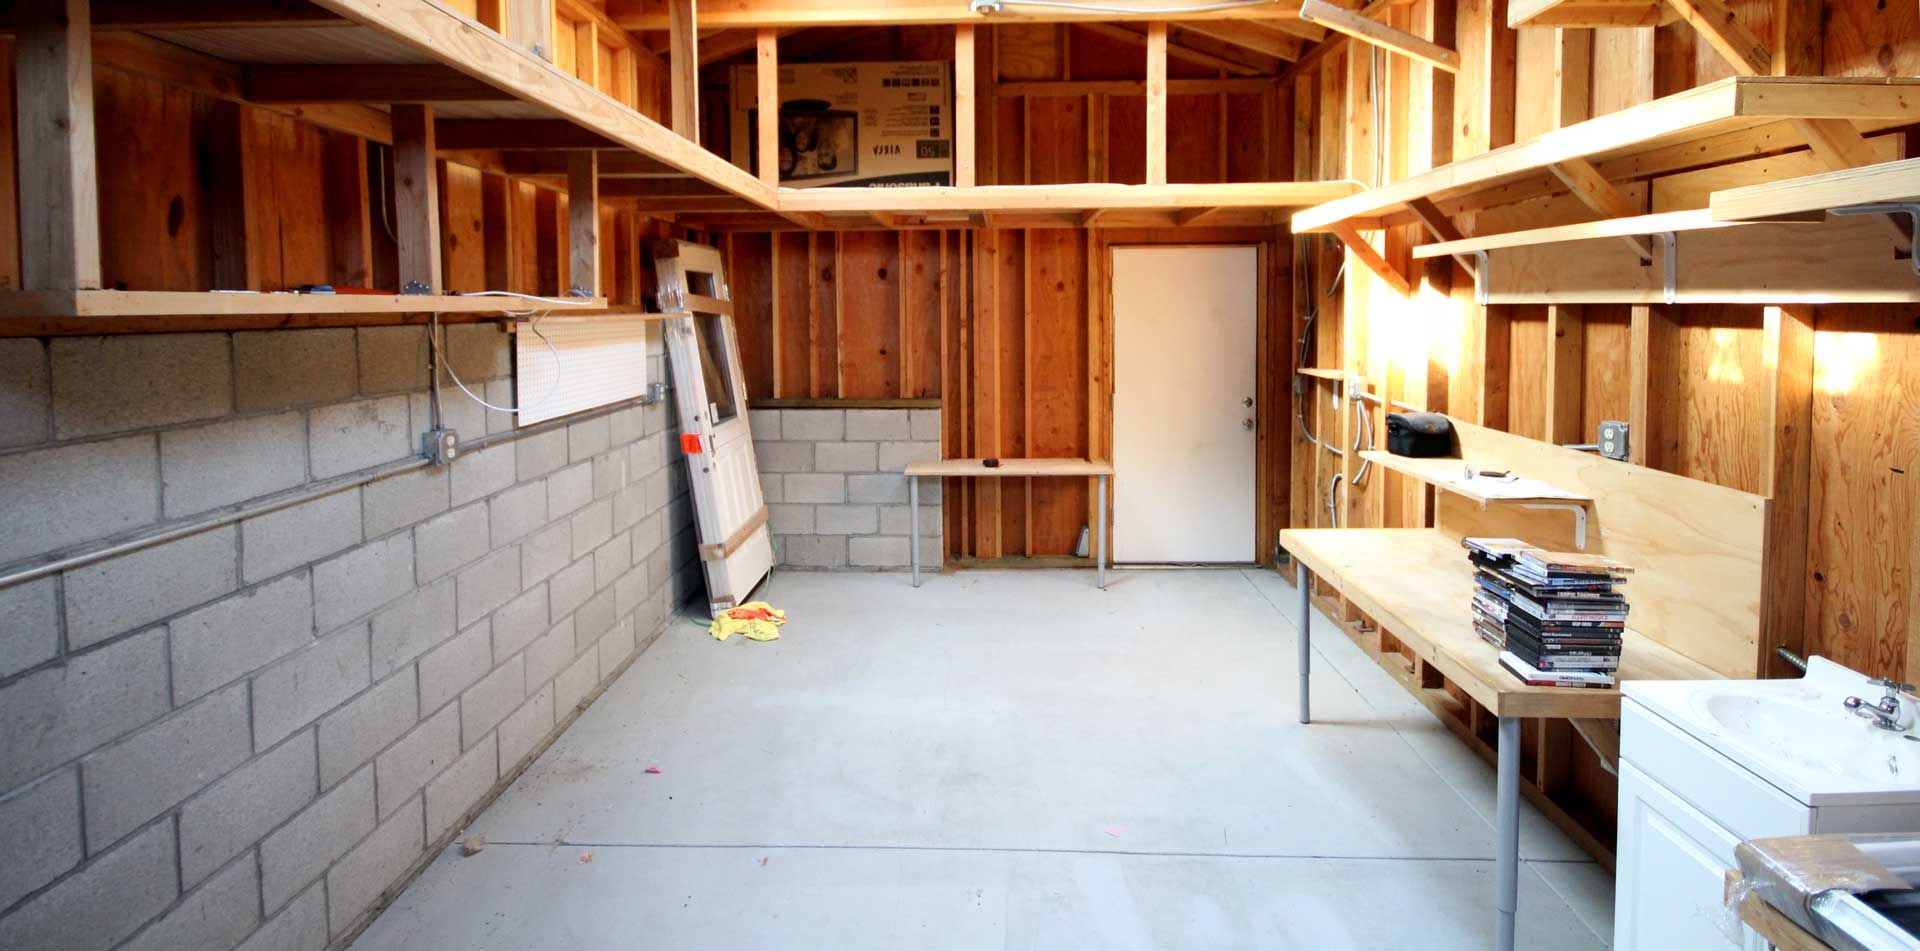 Contact Home Addition Contractor near Me Los Angeles for Renovation Services